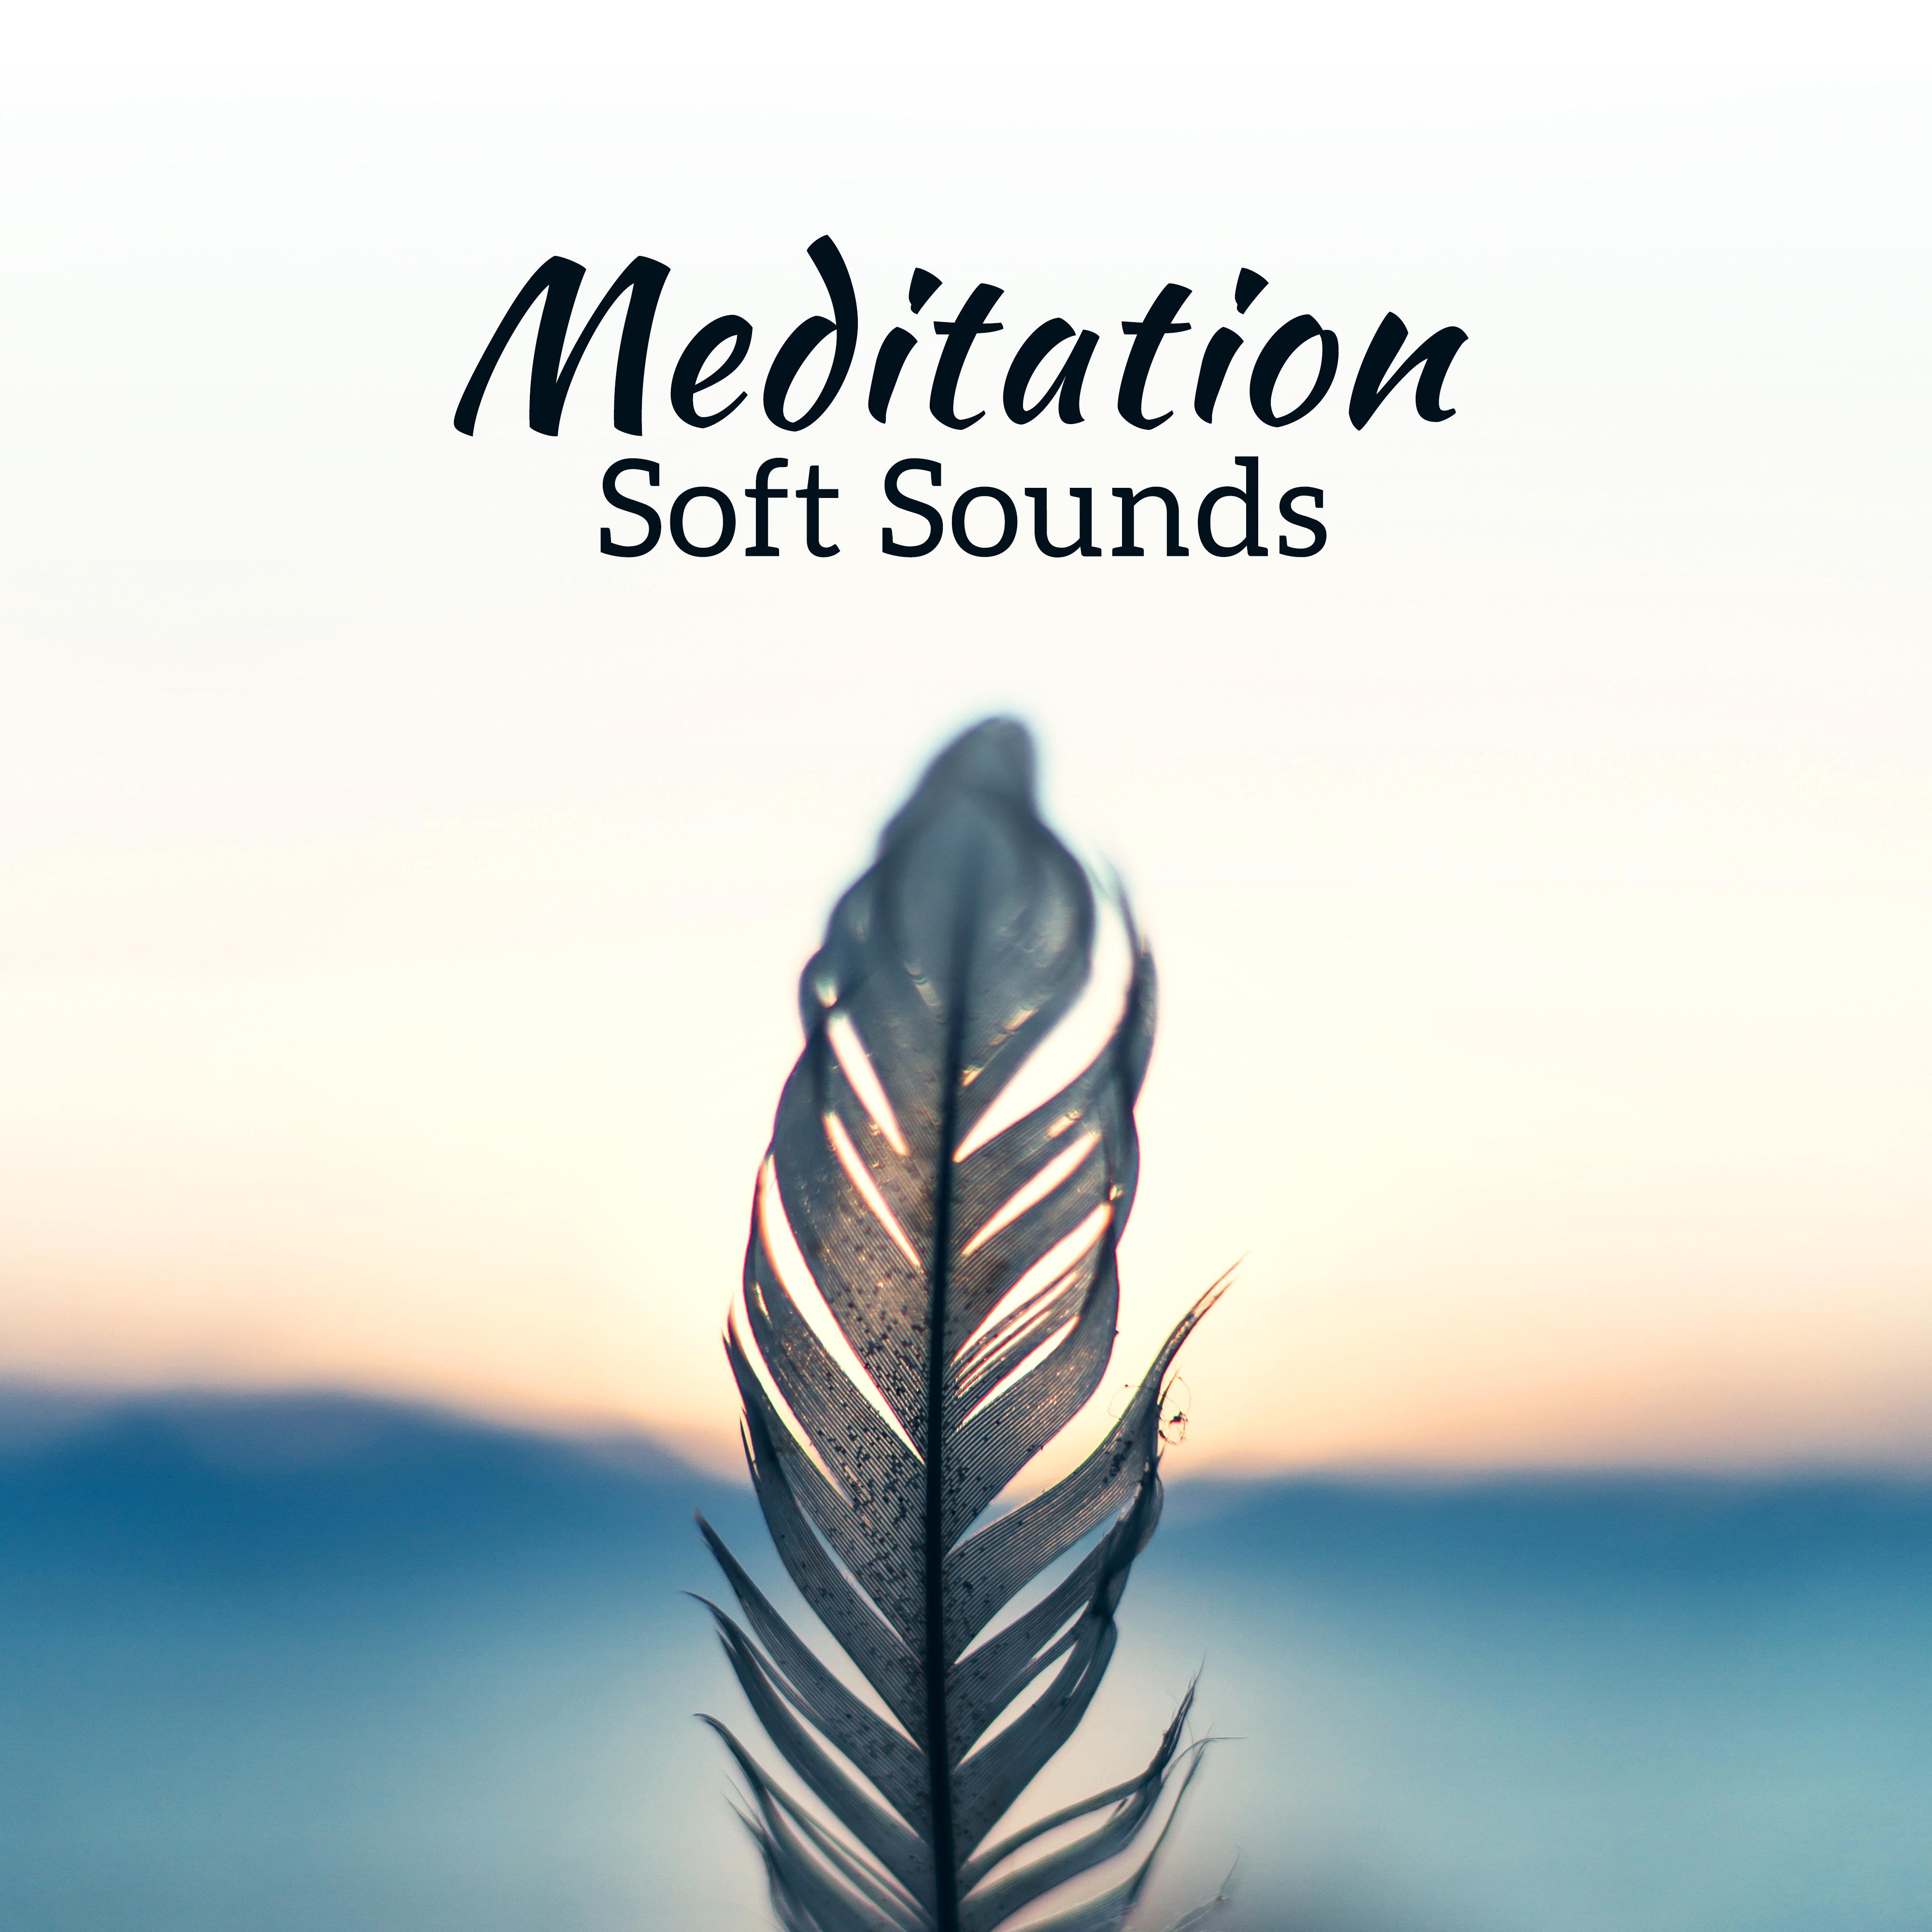 Meditation Soft Sounds – Easy Listening, Peaceful Songs, Chilled Melodies, Meditation & Relaxation, Zen Garden